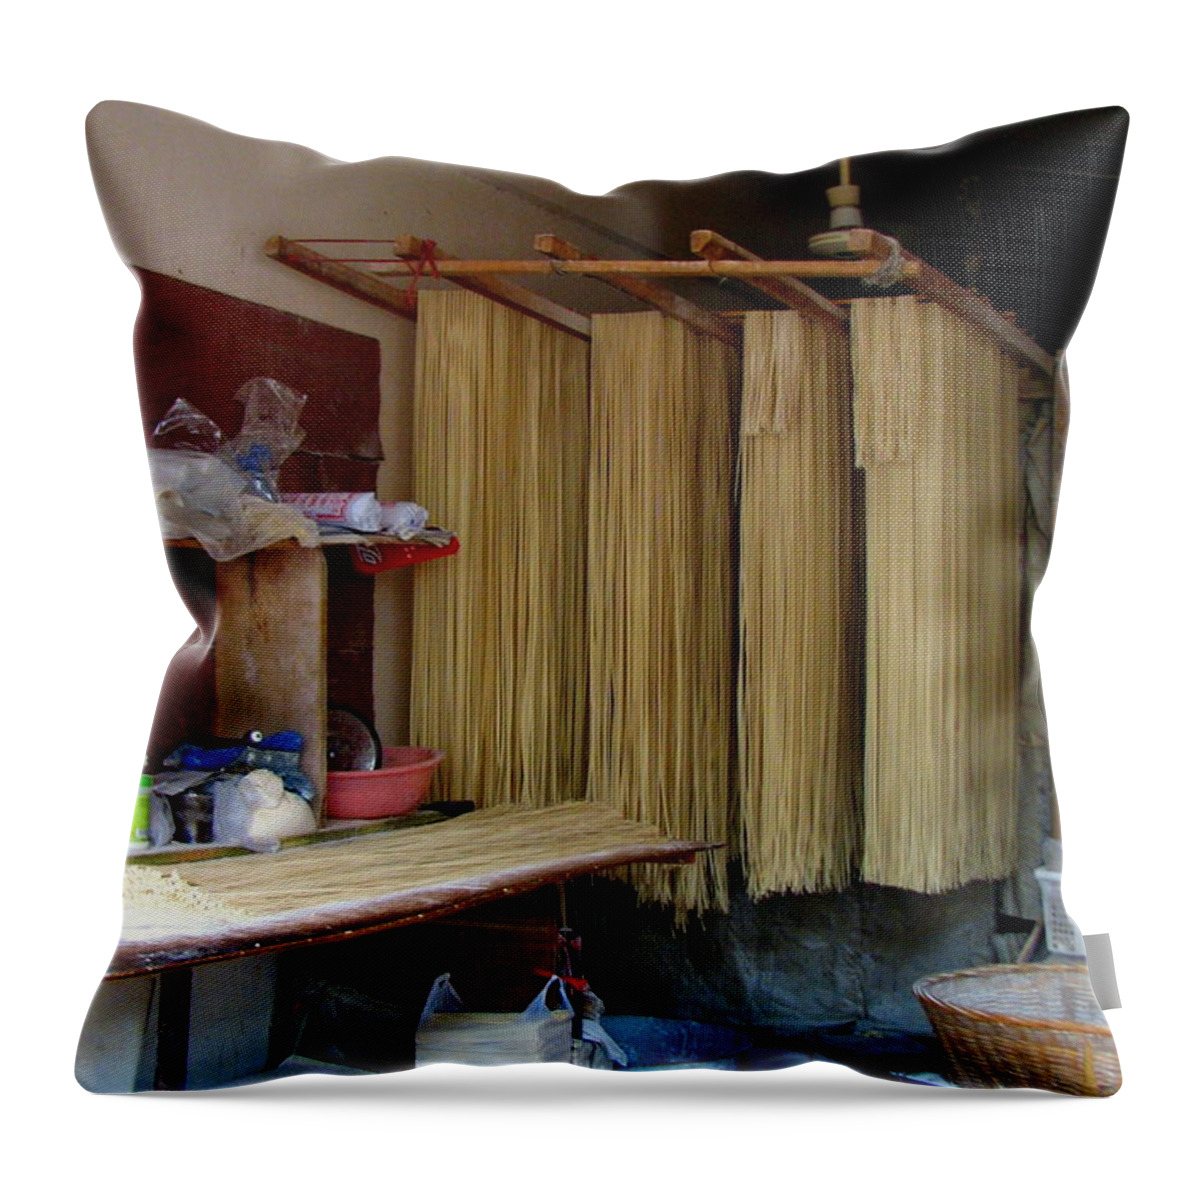 China Throw Pillow featuring the photograph Chinese Noodles by Carla Parris